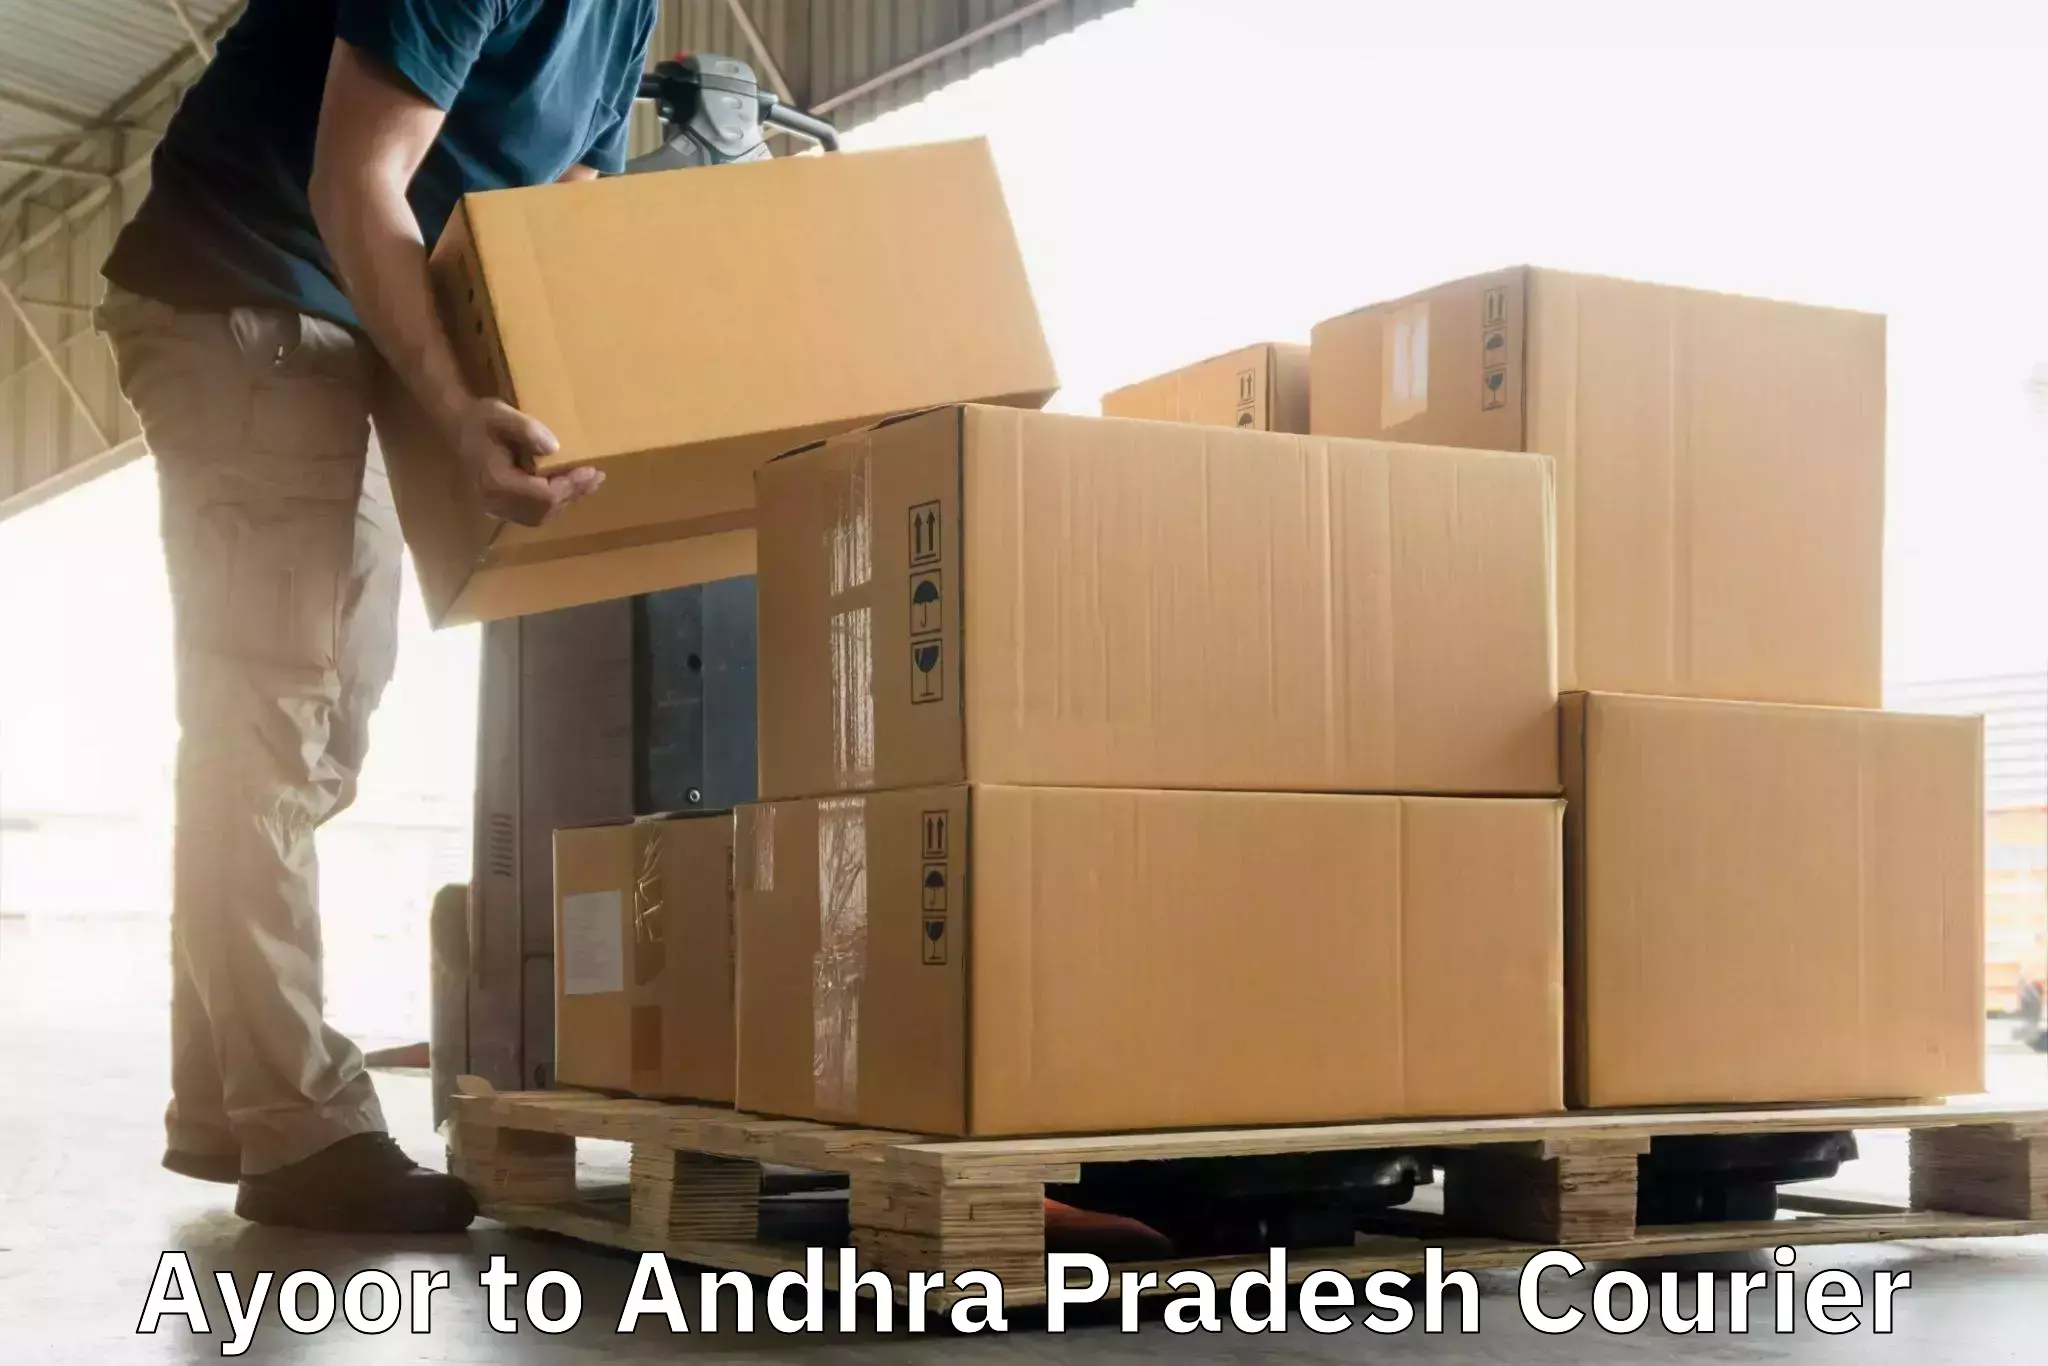 Expedited parcel delivery Ayoor to Samarlakota